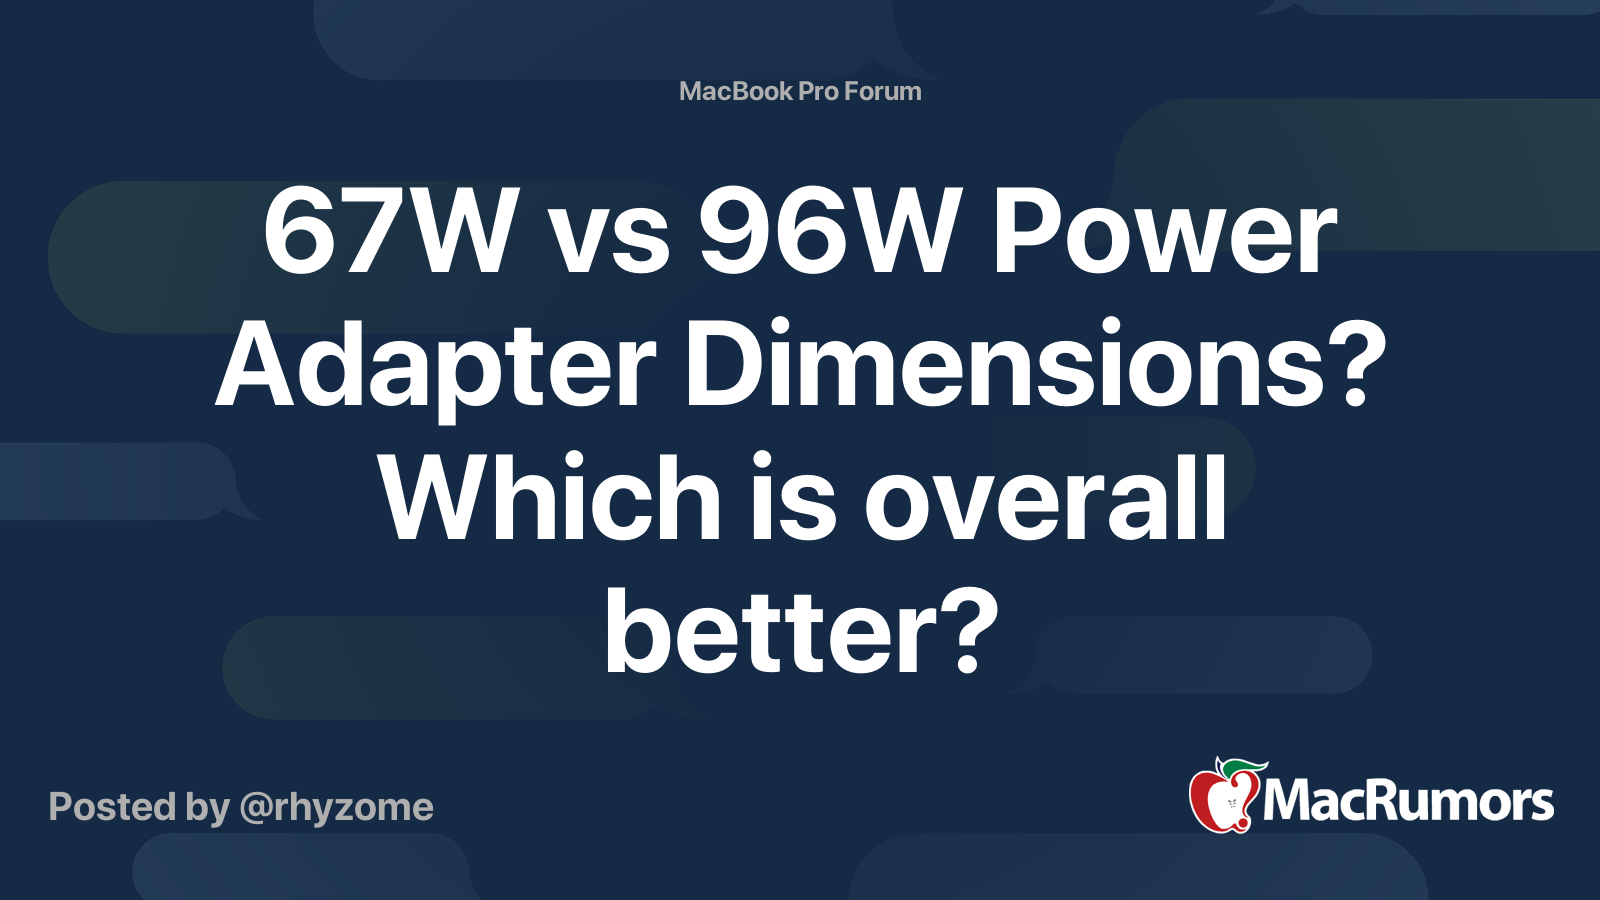 67W vs 96W Power Adapter Dimensions? Which is overall better?